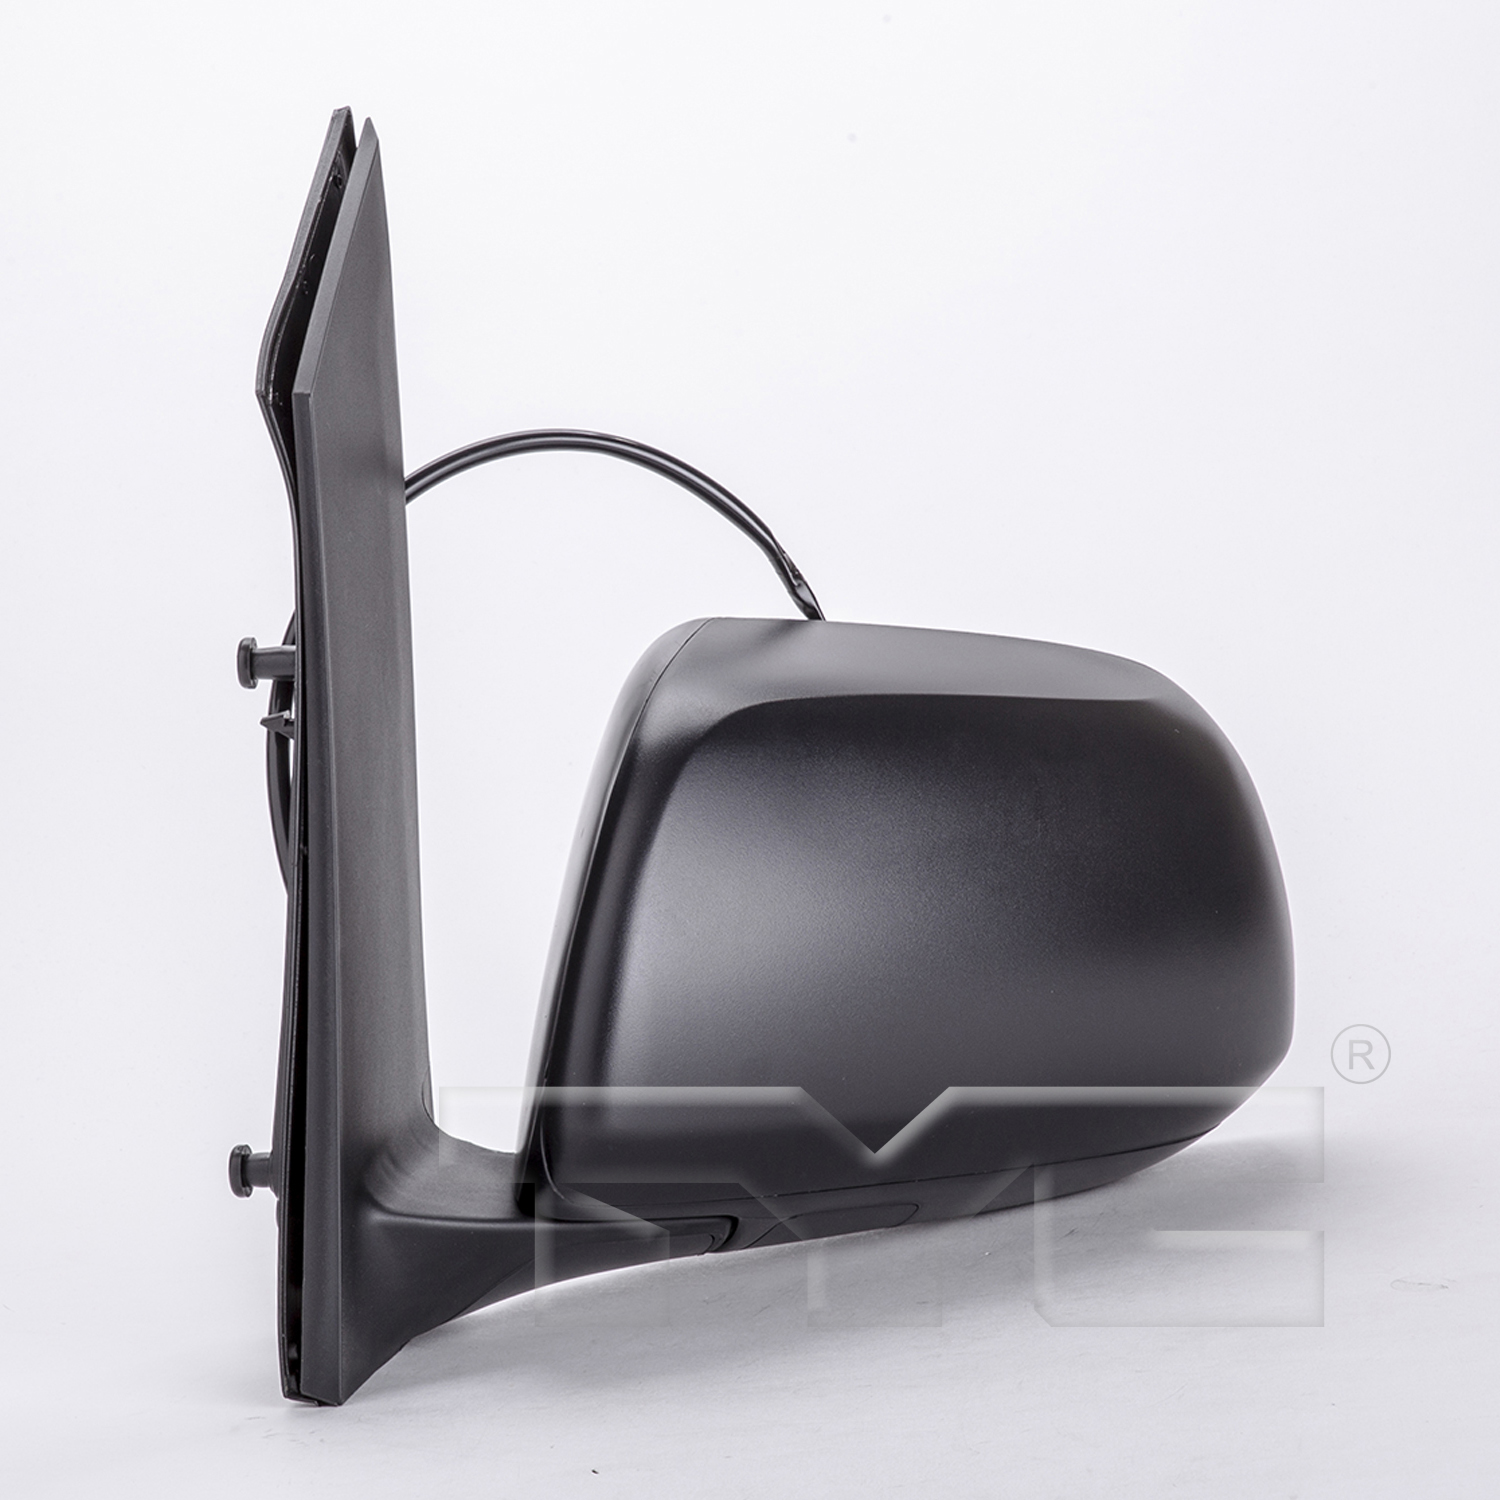 Aftermarket MIRRORS for TOYOTA - SIENNA, SIENNA,11-14,LT Mirror outside rear view